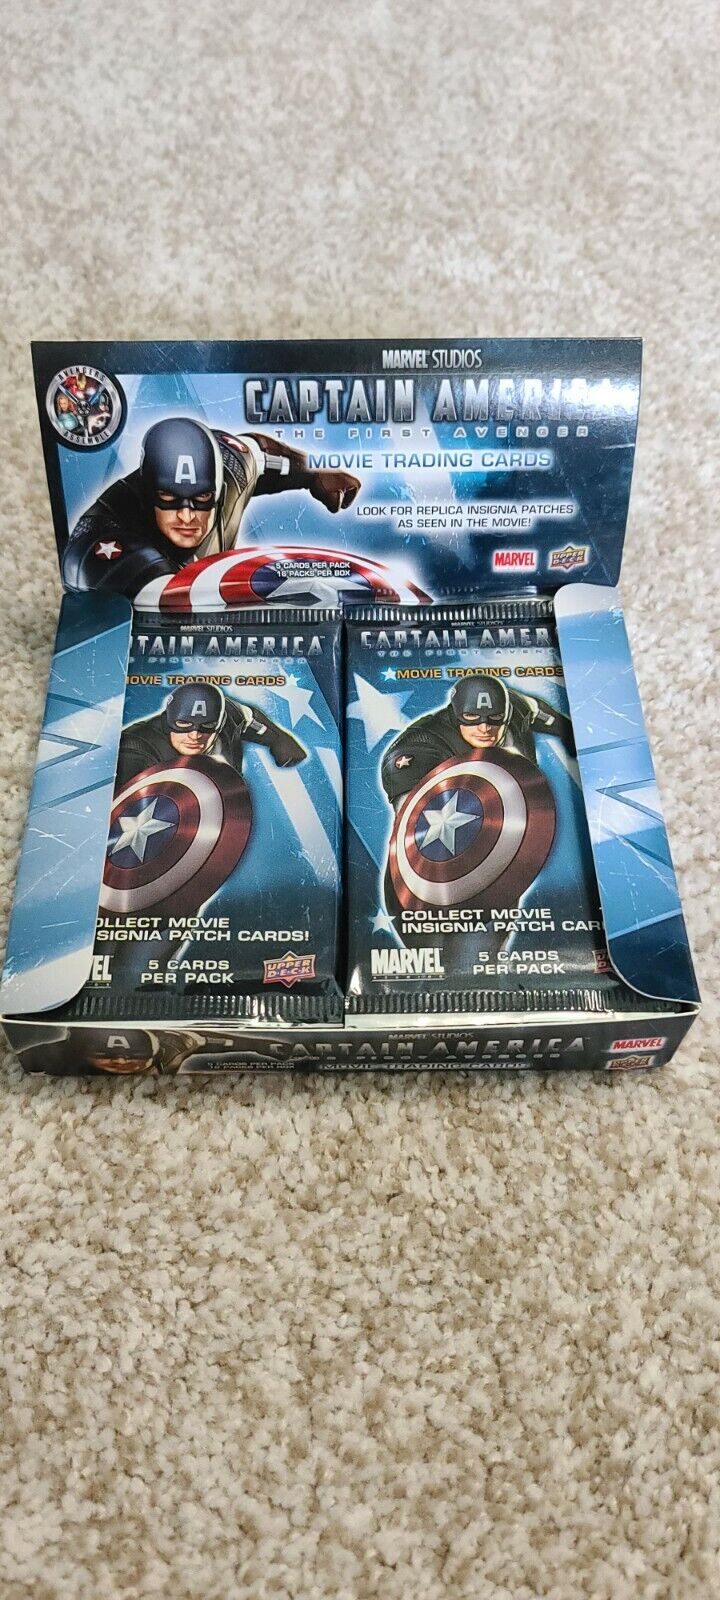 2011 CAPTAIN AMERICA The First Avenger Movie 1 Factory Sealed Trading Card Packs